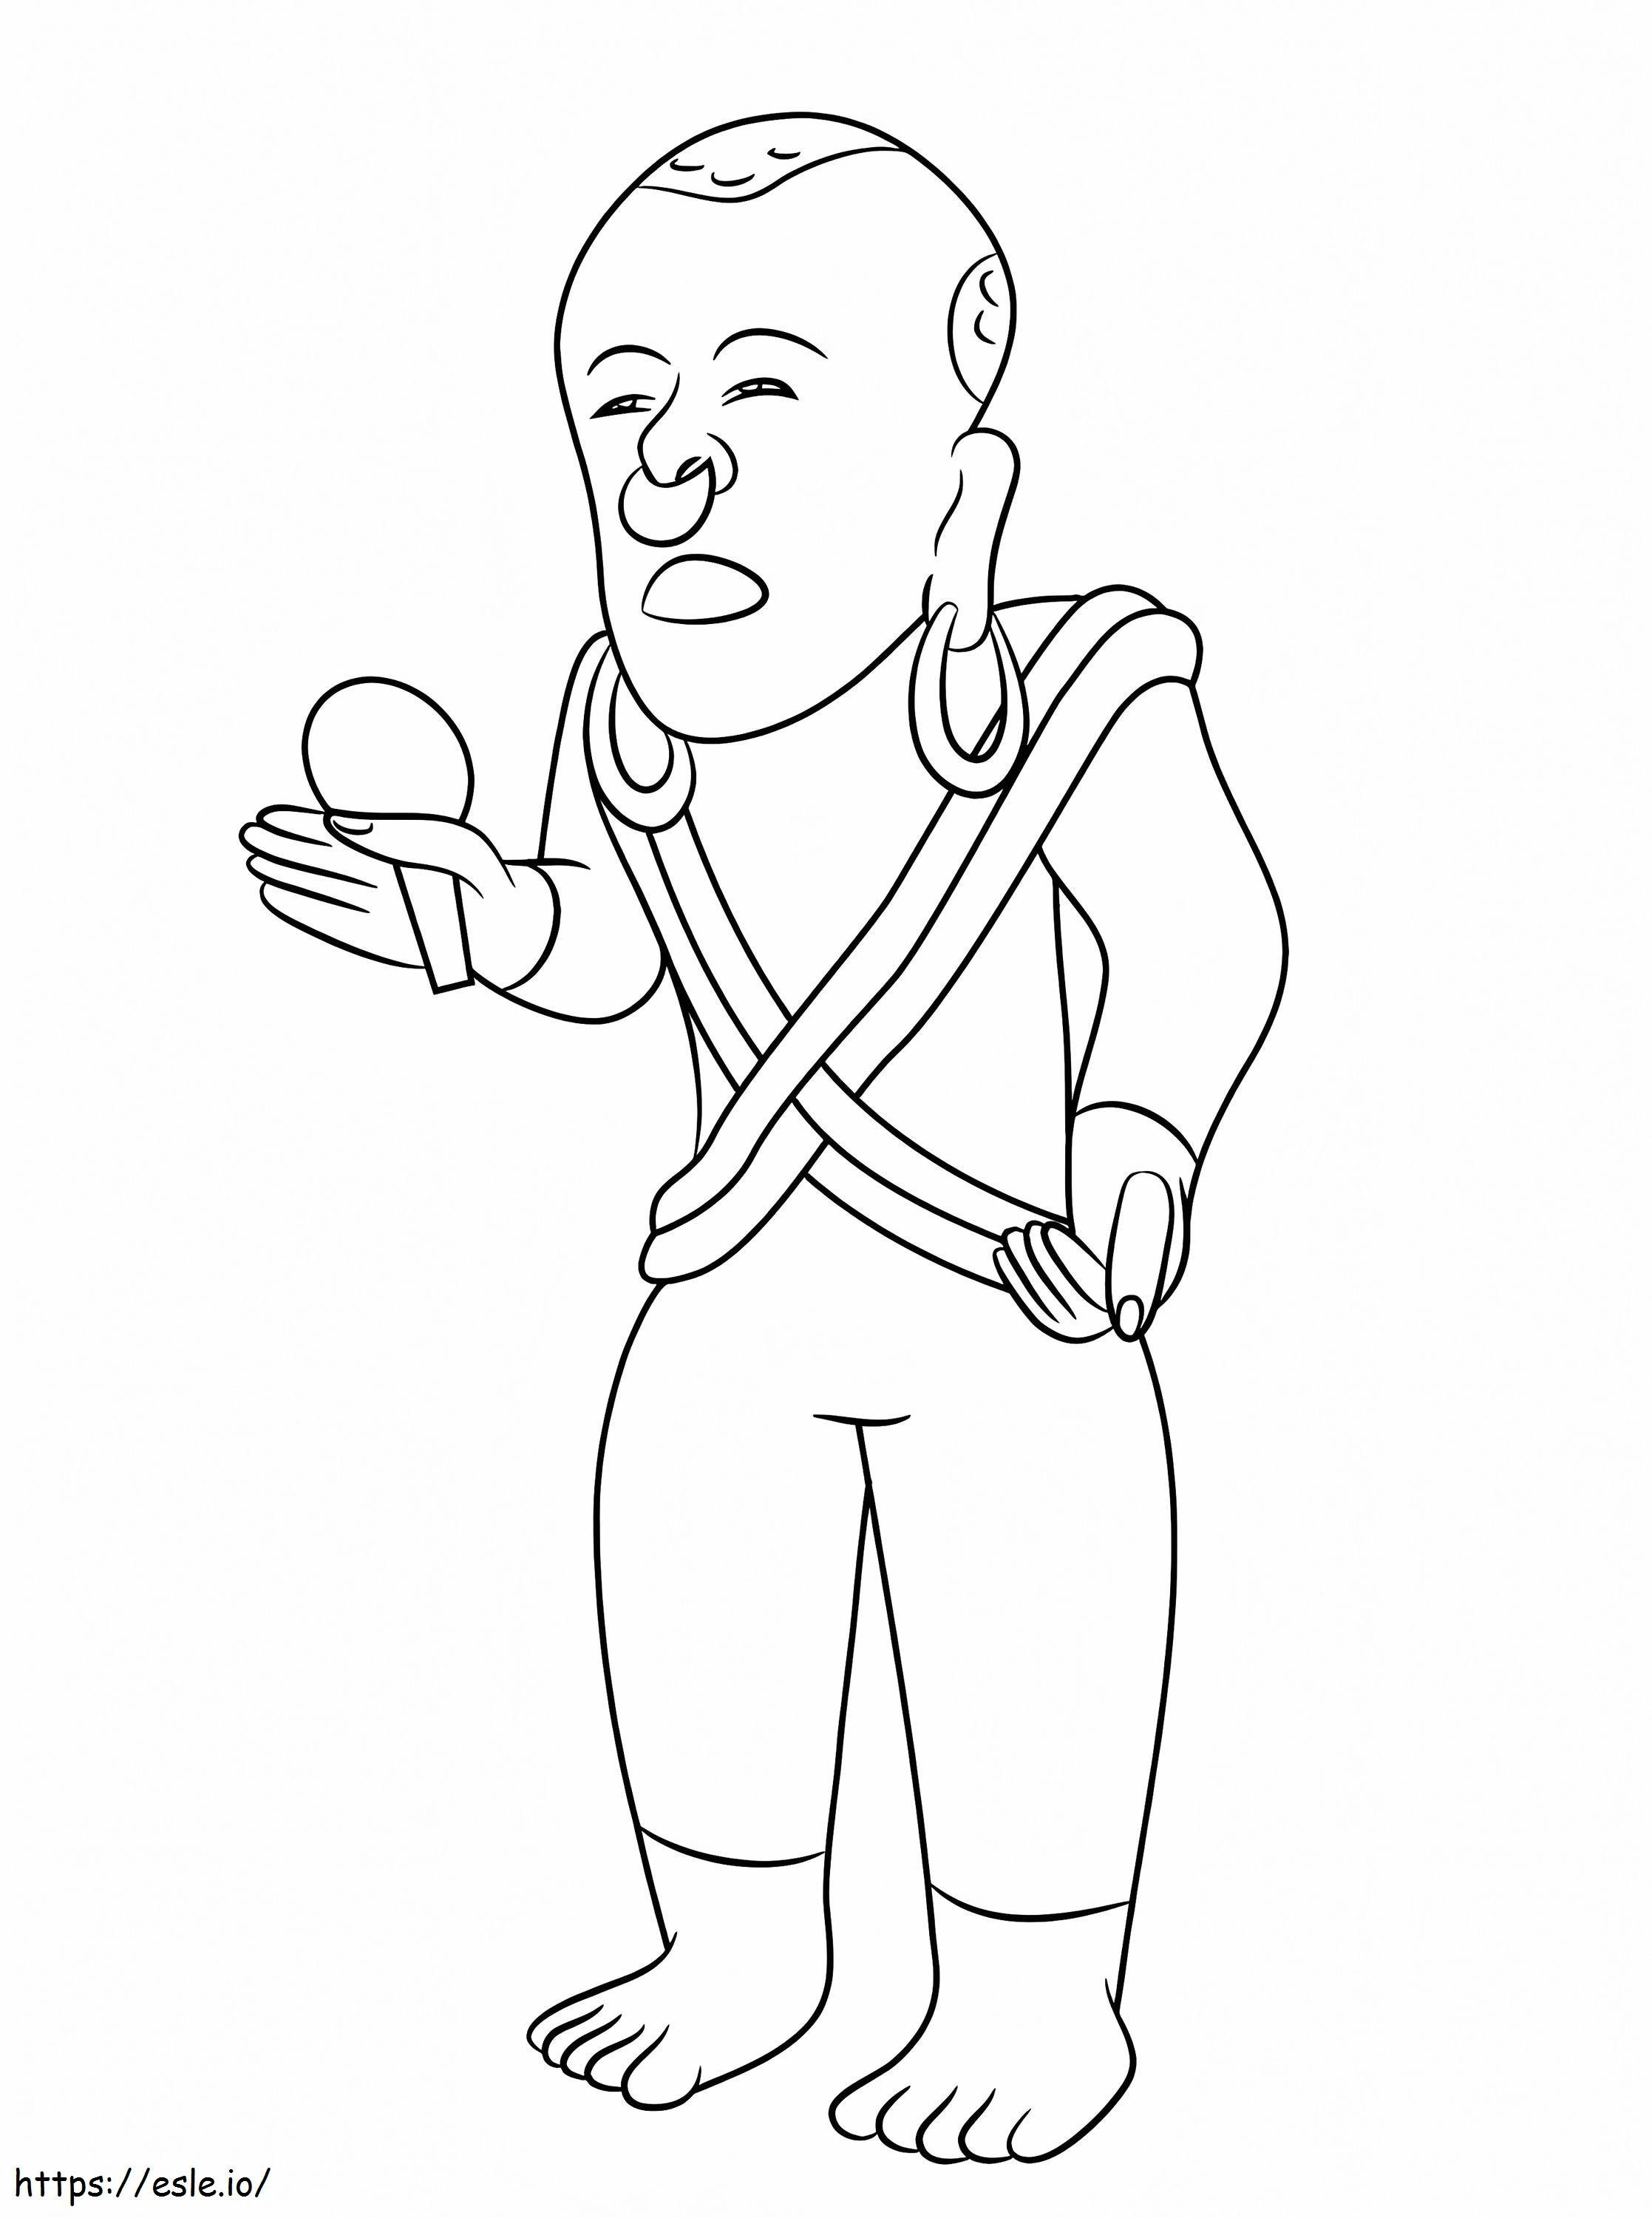 Gfndrrsg coloring page